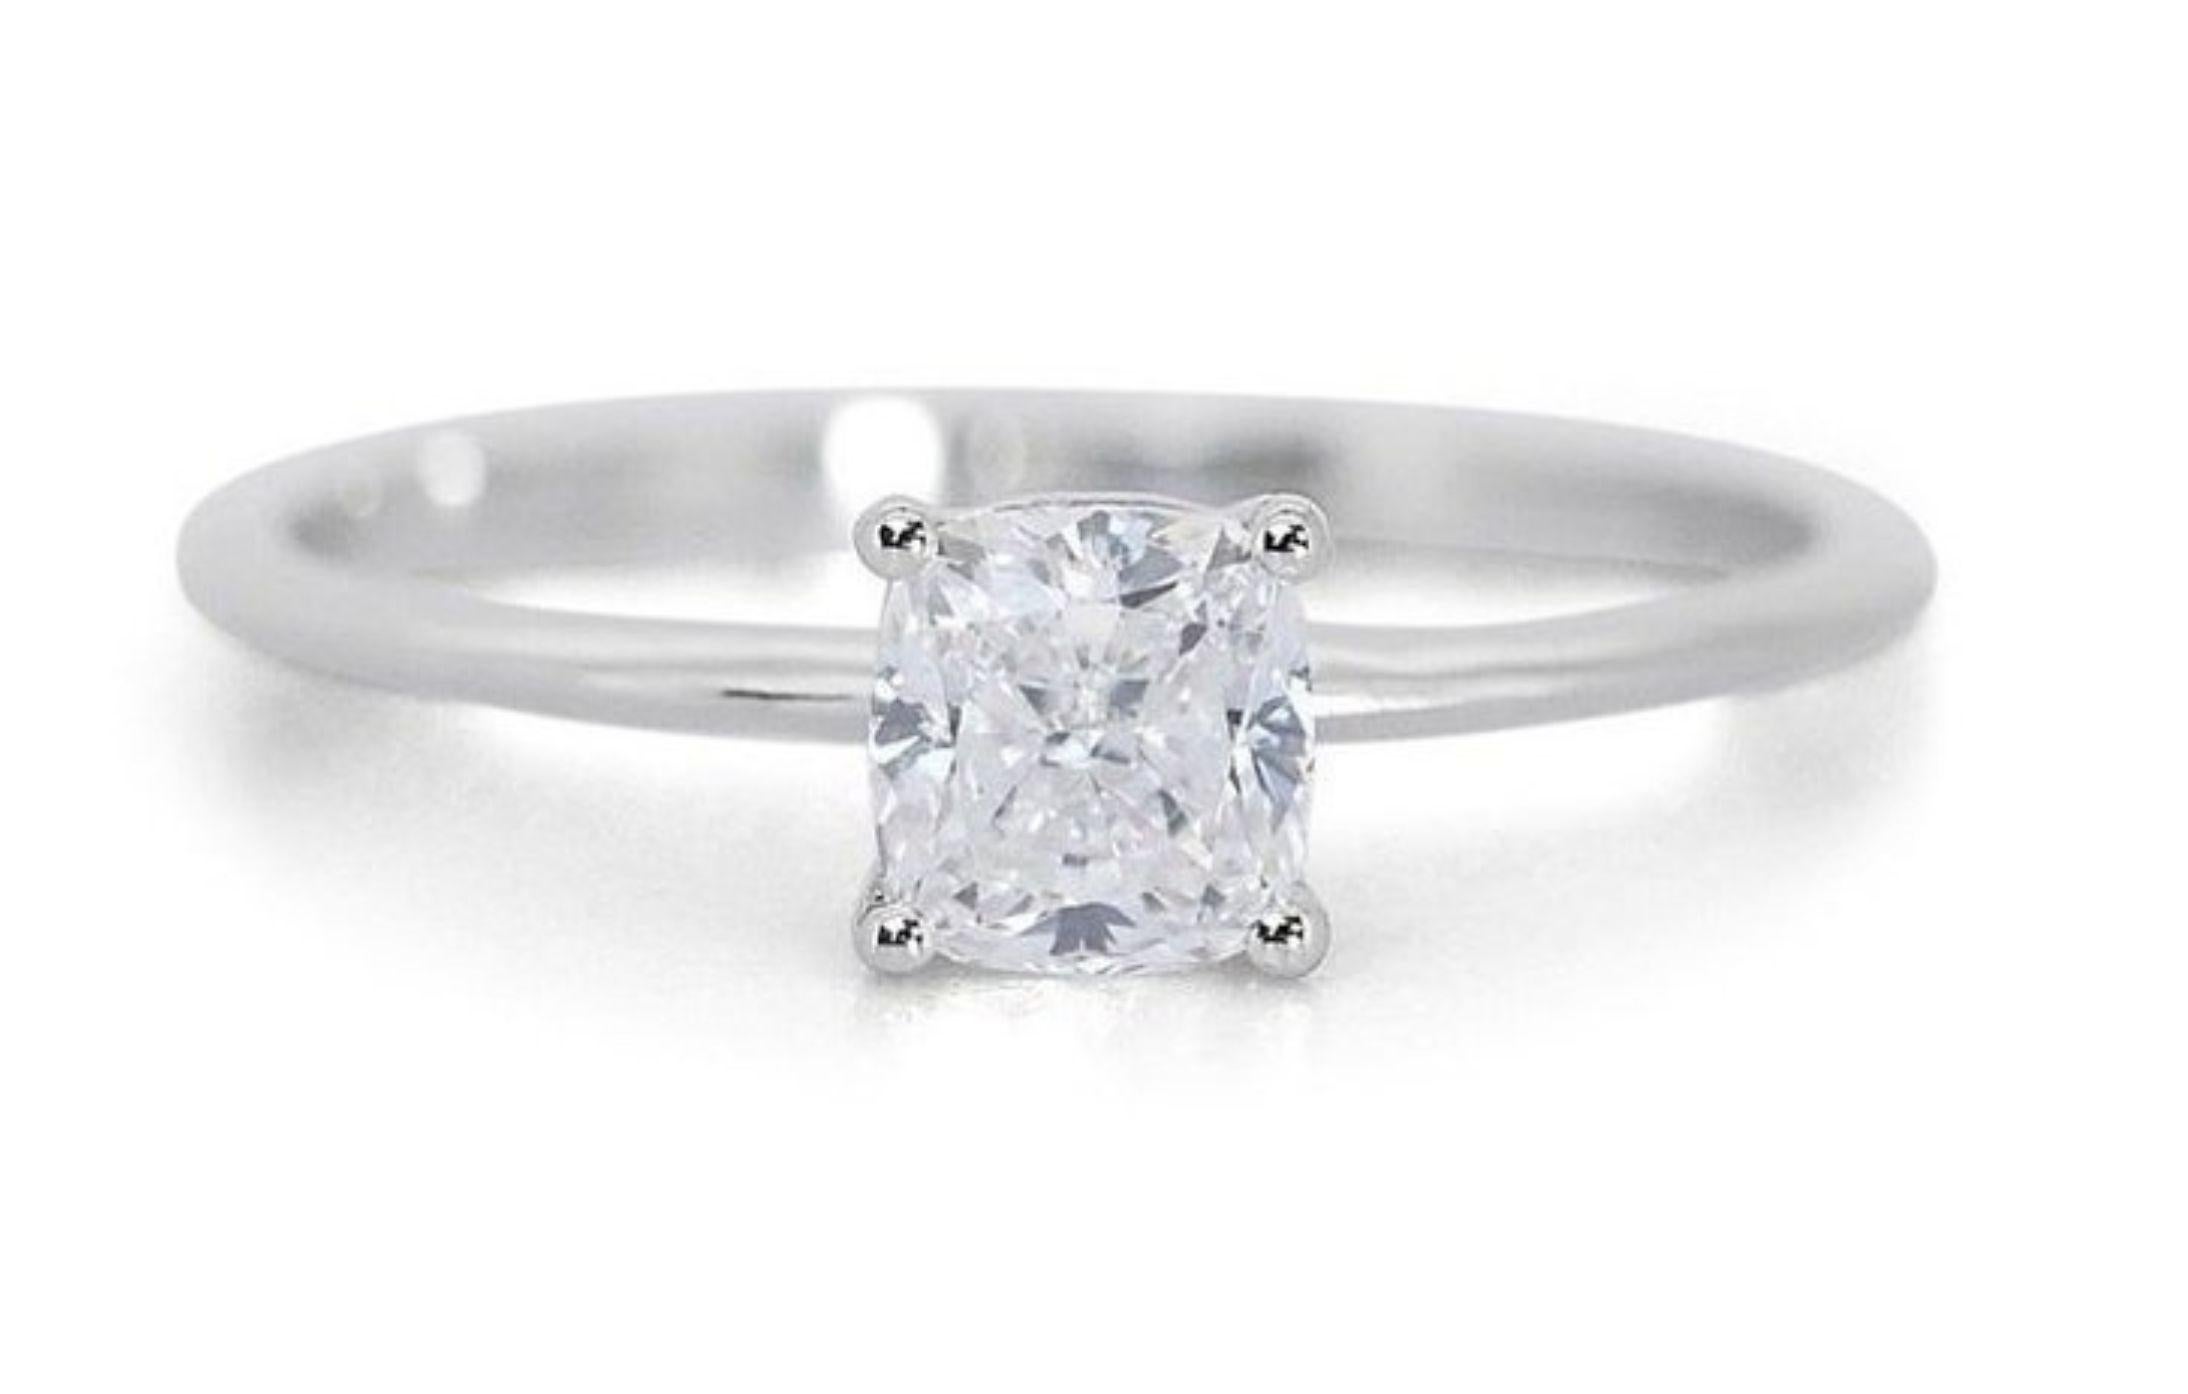 Dazzling 1.52 Carat Cushion Modified Diamond Ring in 18K White Gold For Sale